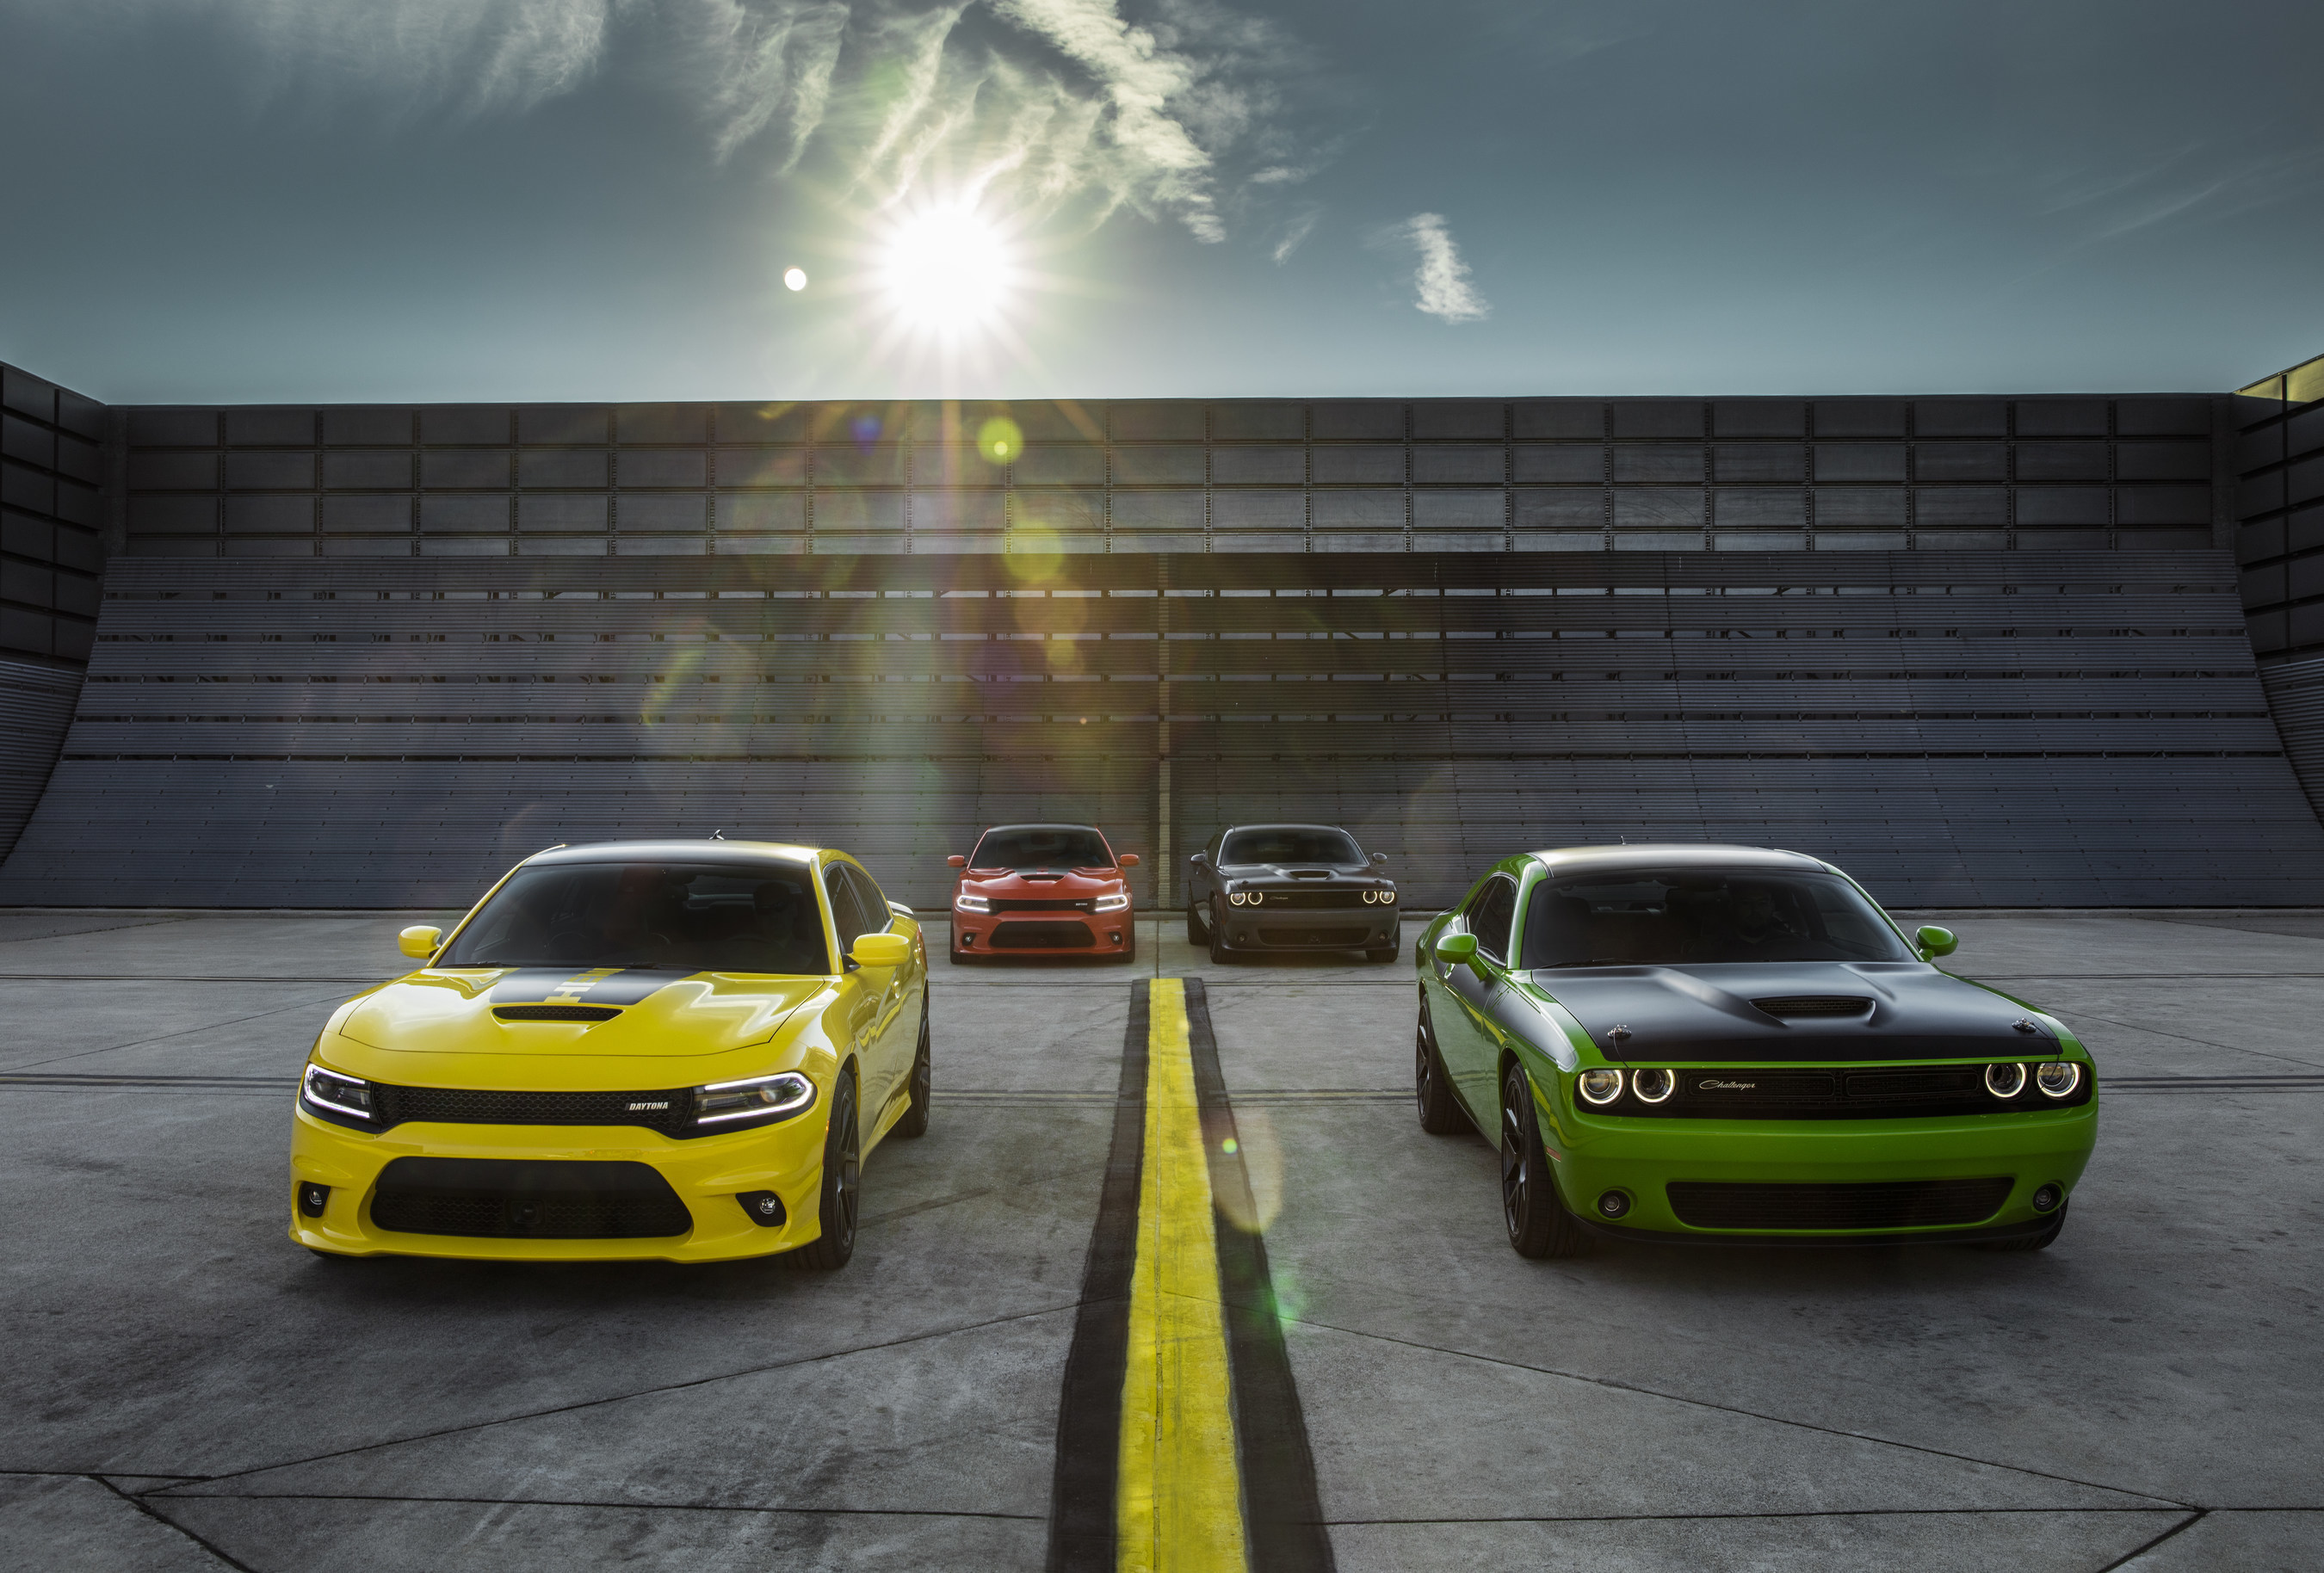 New 2017 Dodge Challenger T/A and Charger Daytona - two performance-upgraded models infused with heritage style.Dodge believes the golden age of performance cars is now, making this year's Woodward Dream Cruise the perfect time and place to reintroduce the brand's two famed, race-bred nameplates -- the new 2017 Challenger T/A and Charger Daytona -- muscle cars that deliver even more performance and precision to the naturally aspirated HEMI(R) V-8 lineup with unique powertrain induction and exhaust enhancements, chassis upgrades for greater handling and braking, plus functional performance styling appointments inside and out.